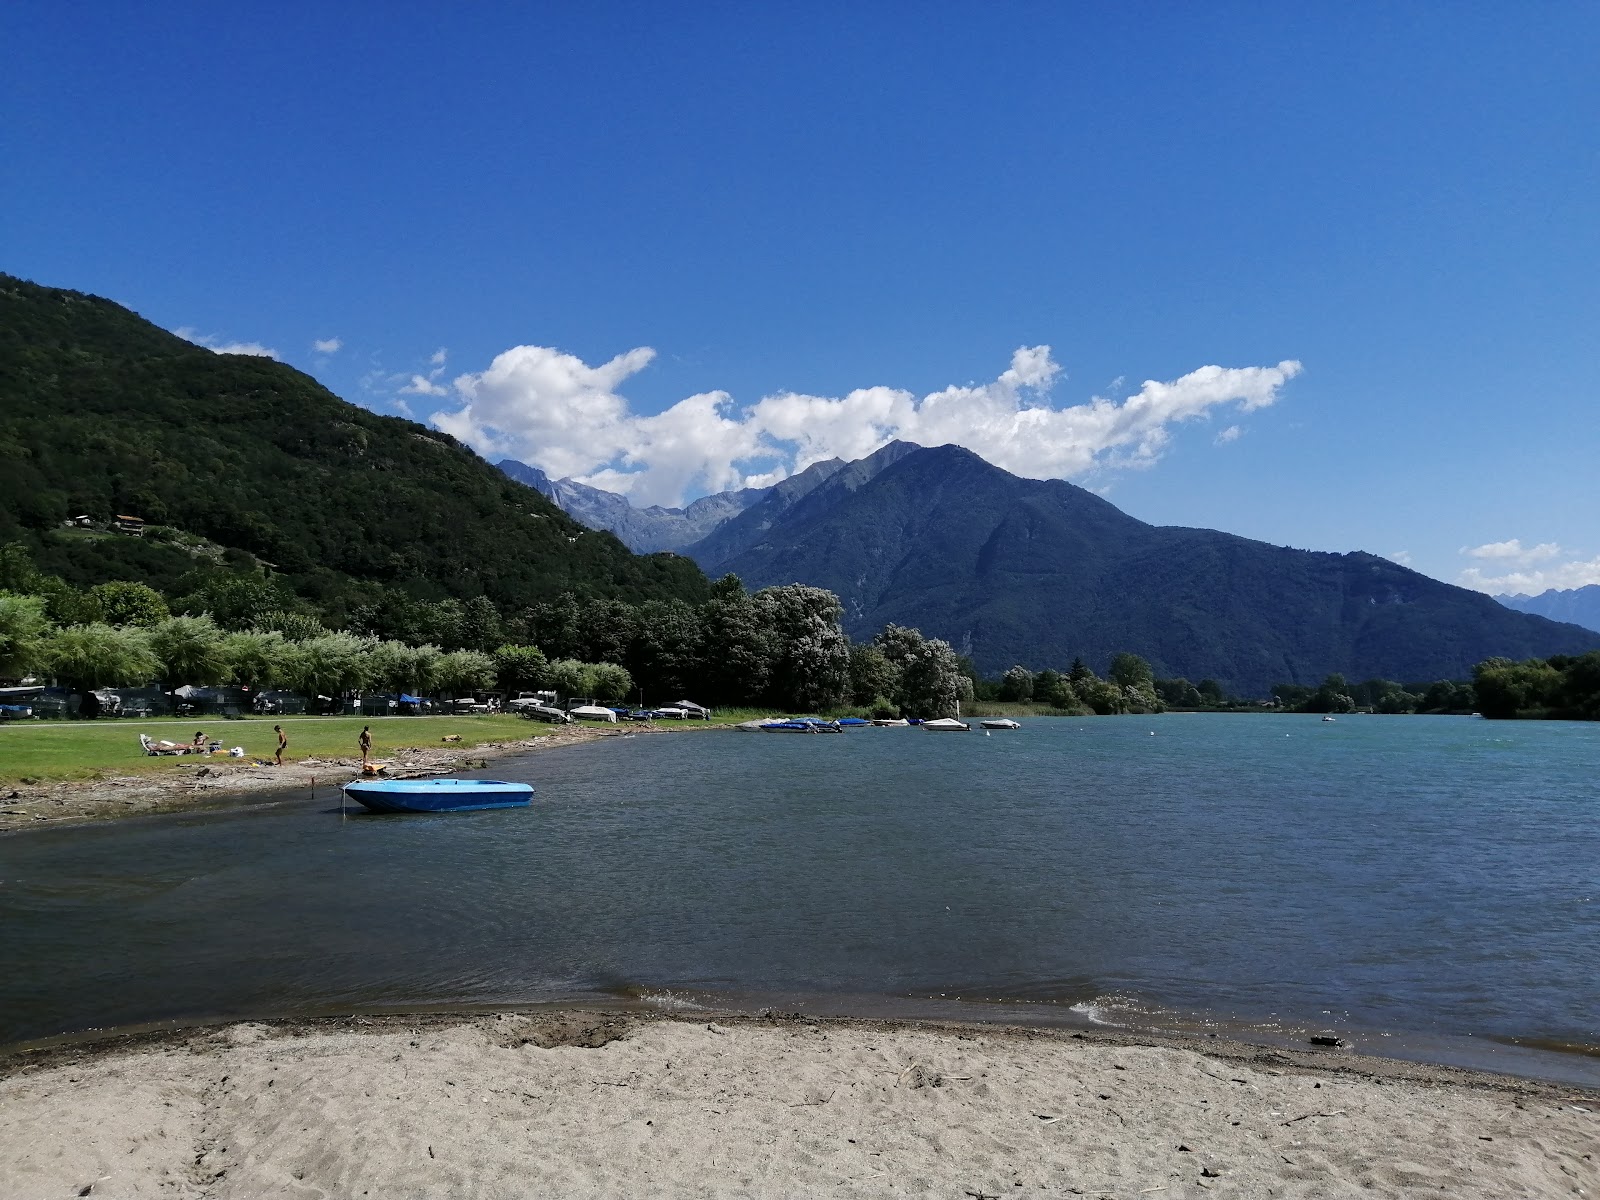 Photo of Spiaggia di Sorico with blue water surface